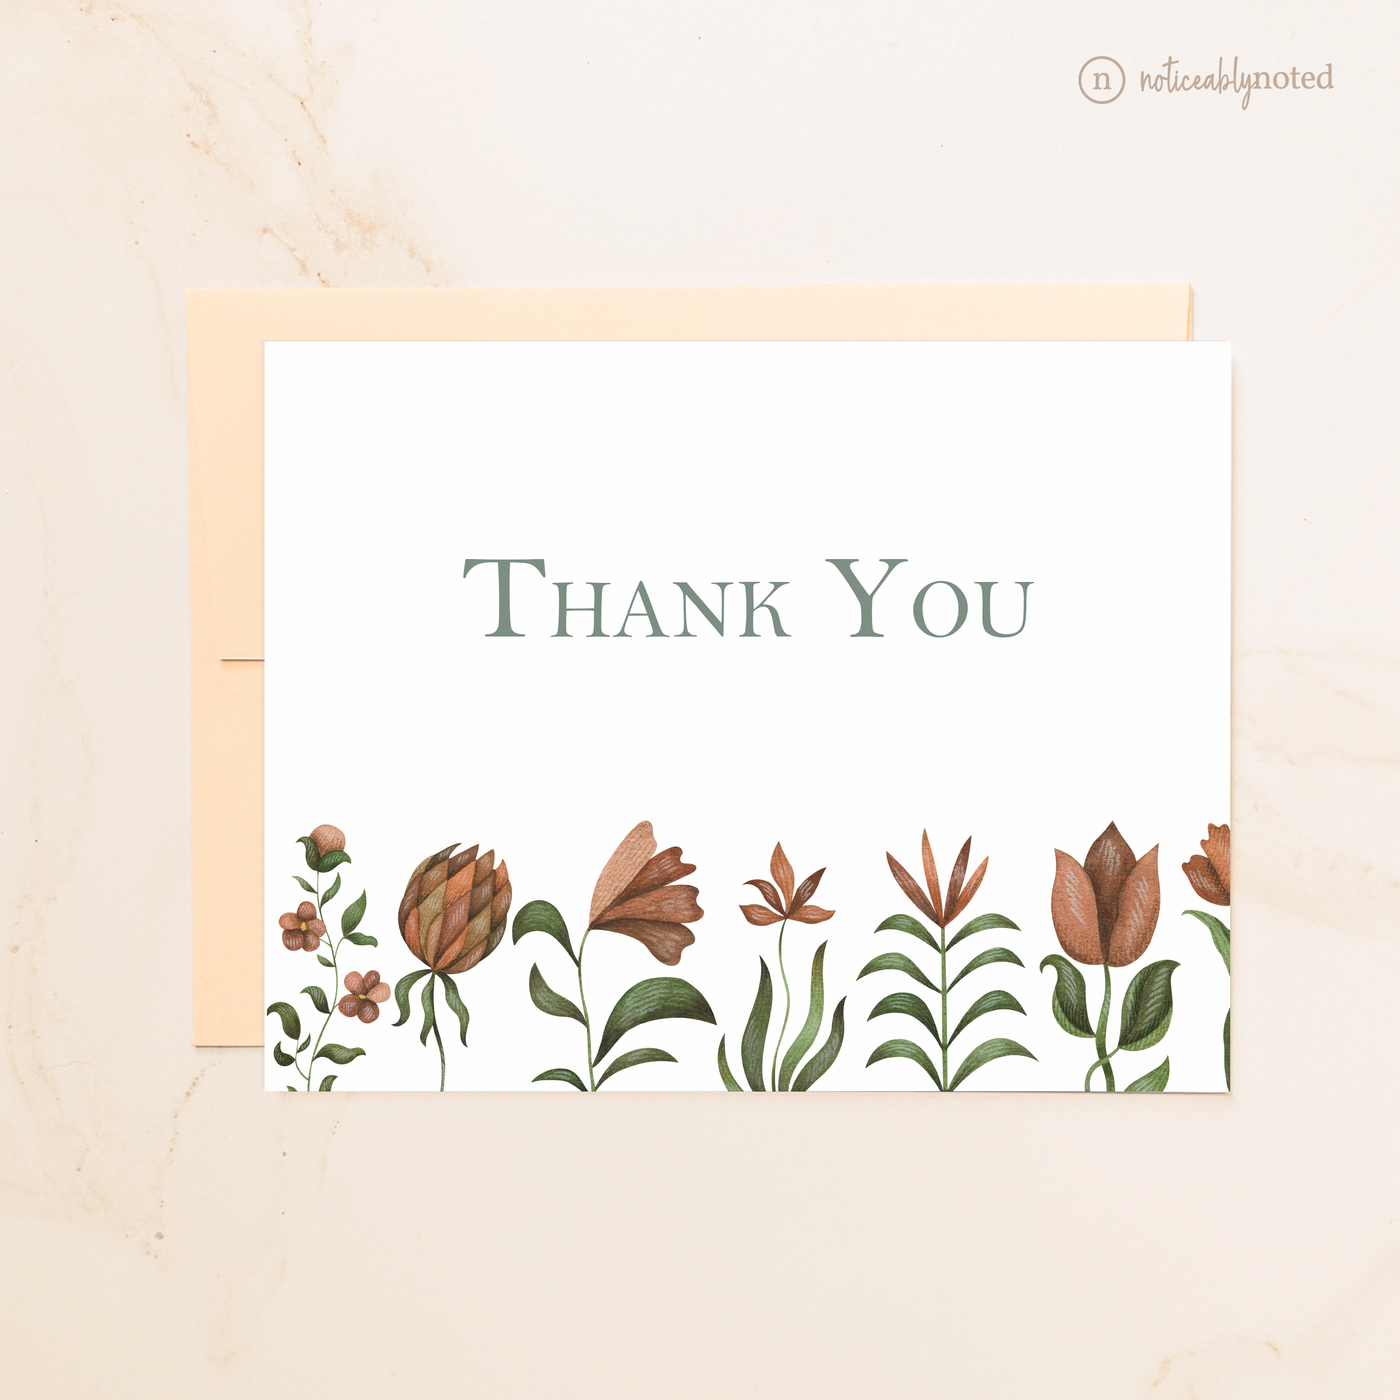 Vintage Floral Thank You Card Set | Noticeably Noted